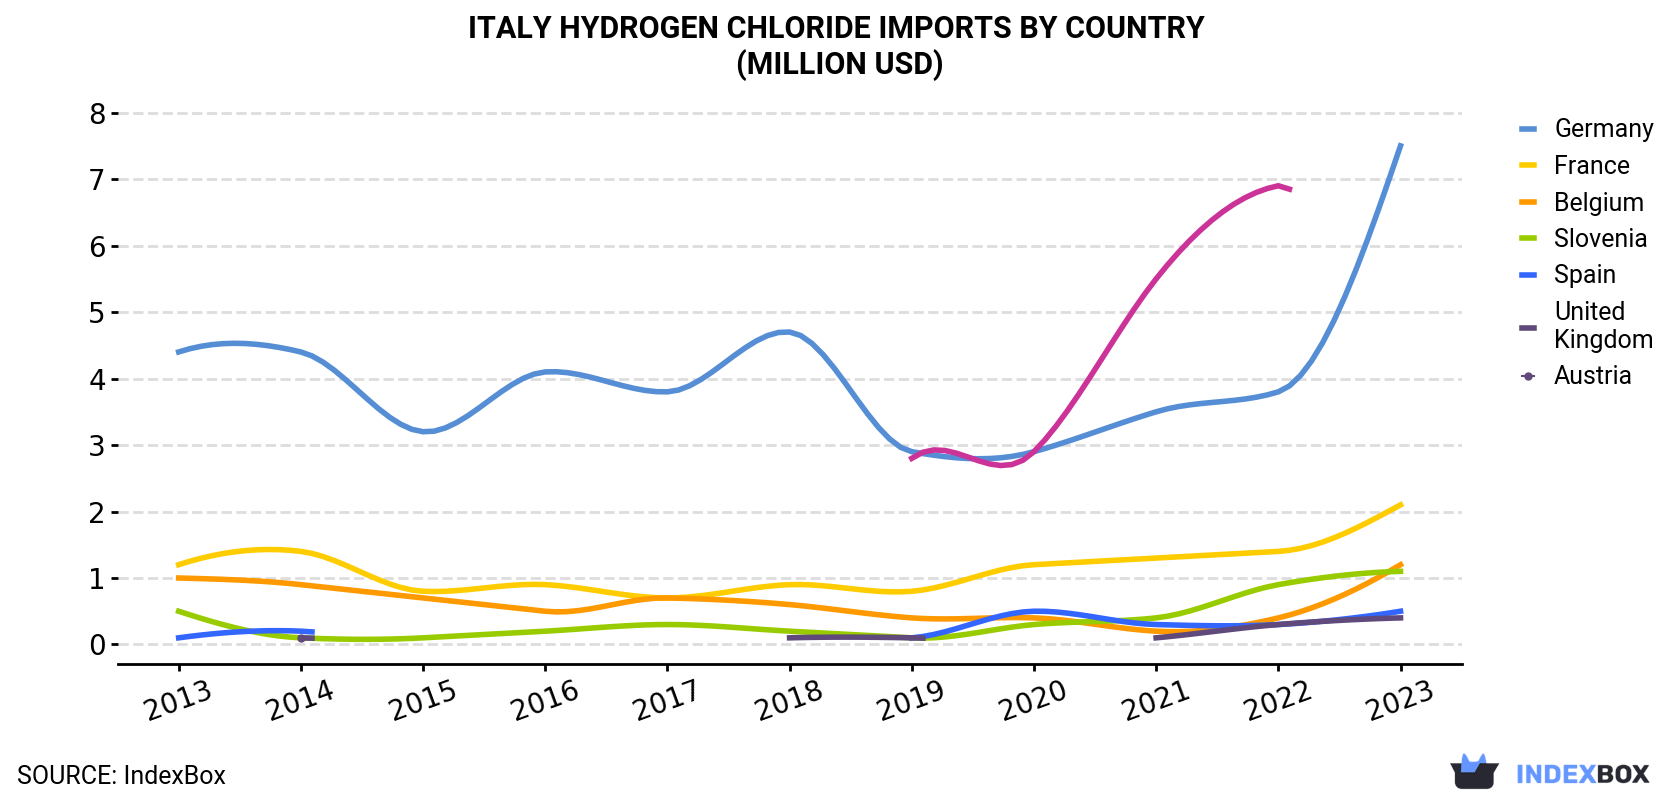 Italy Hydrogen Chloride Imports By Country (Million USD)